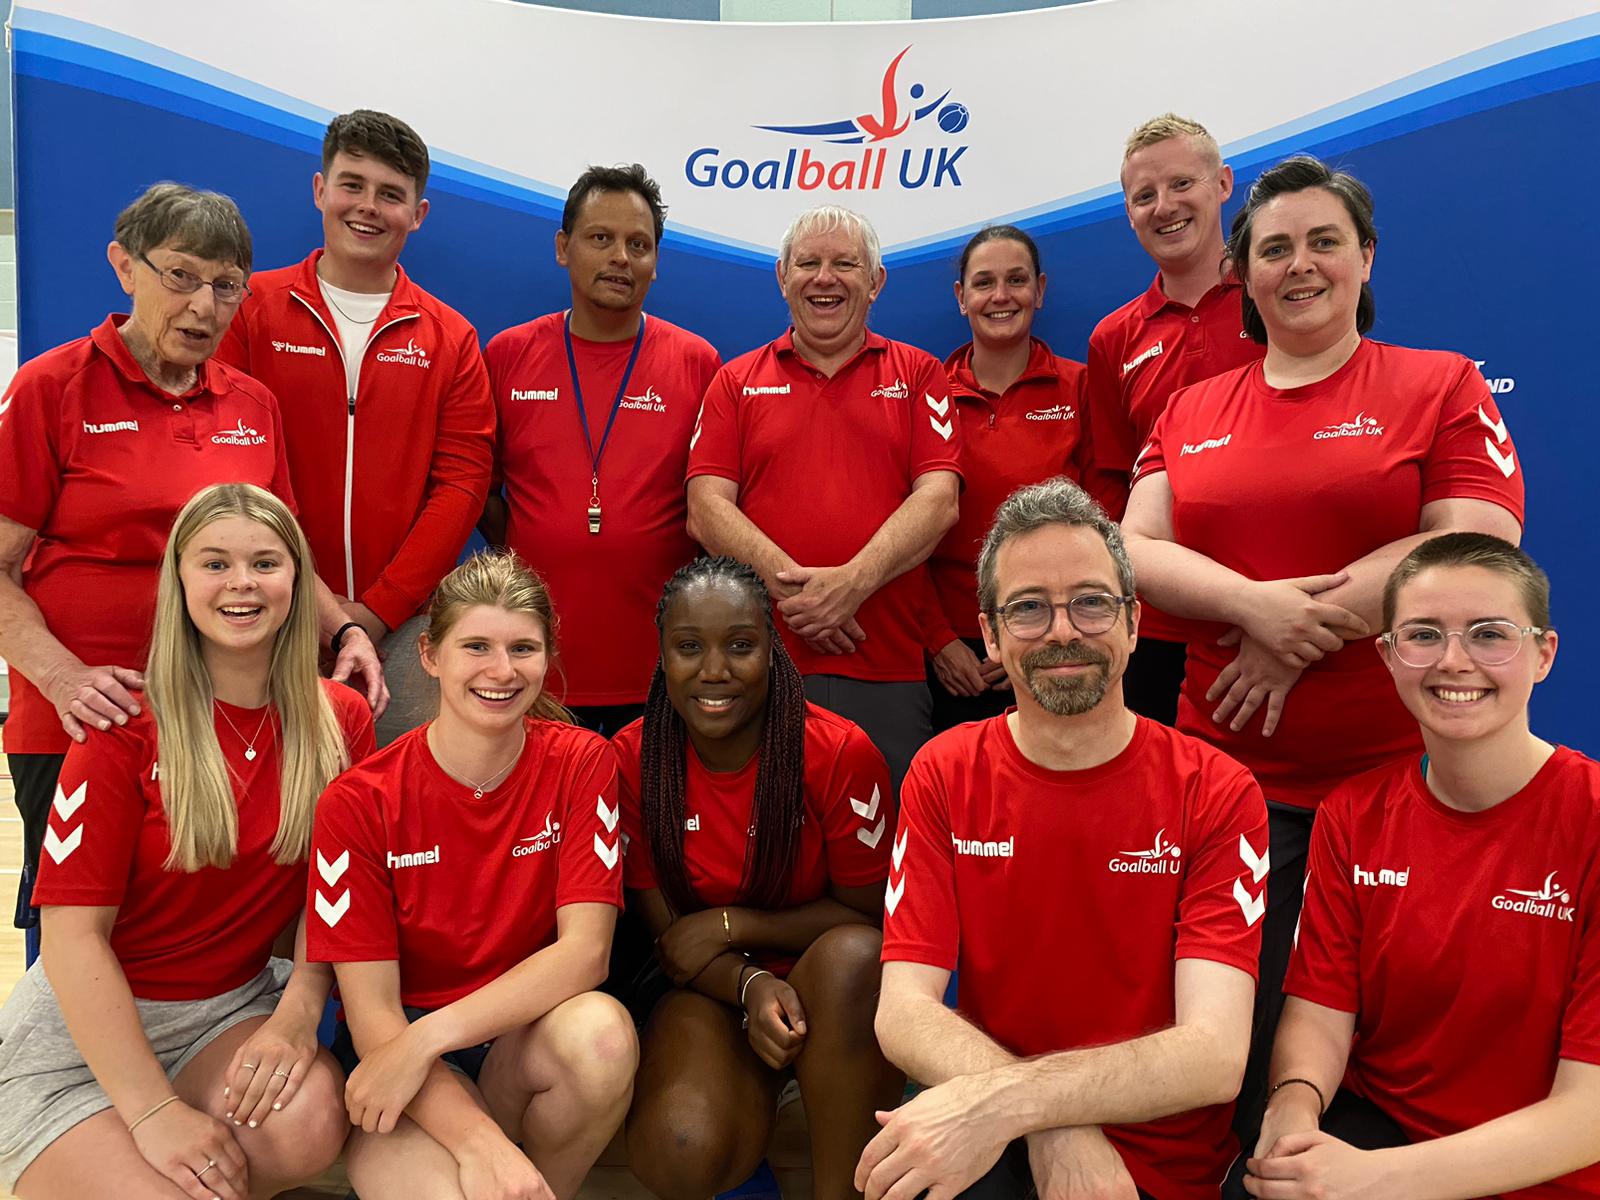 A group of Goalball UK volunteers and activators pose together for a smiley photo at an event